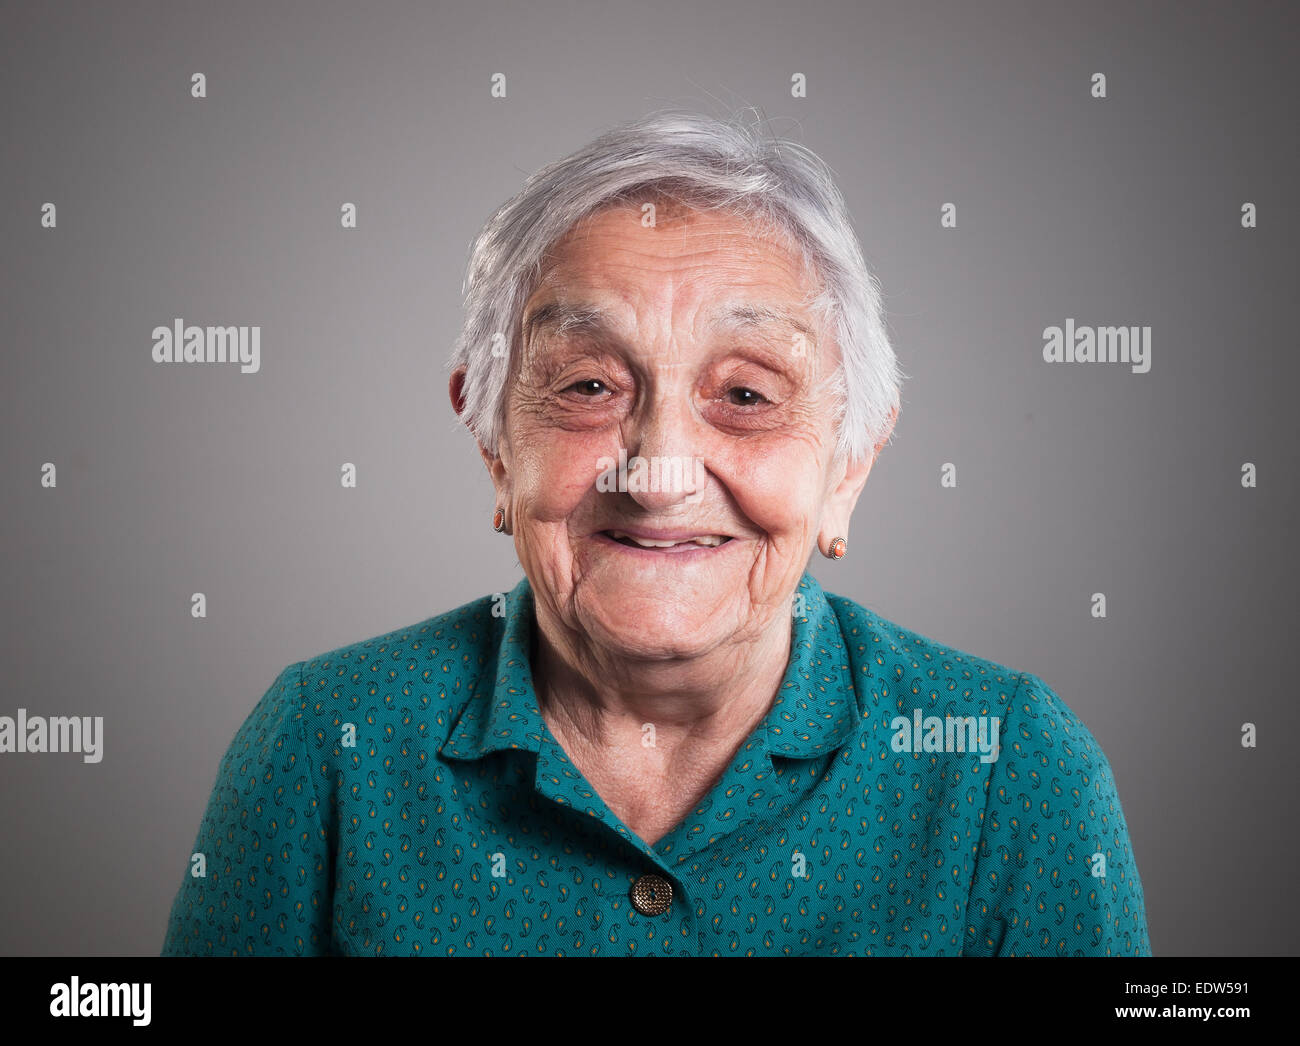 Grandma happy and smiling isolated on grey background Stock Photo